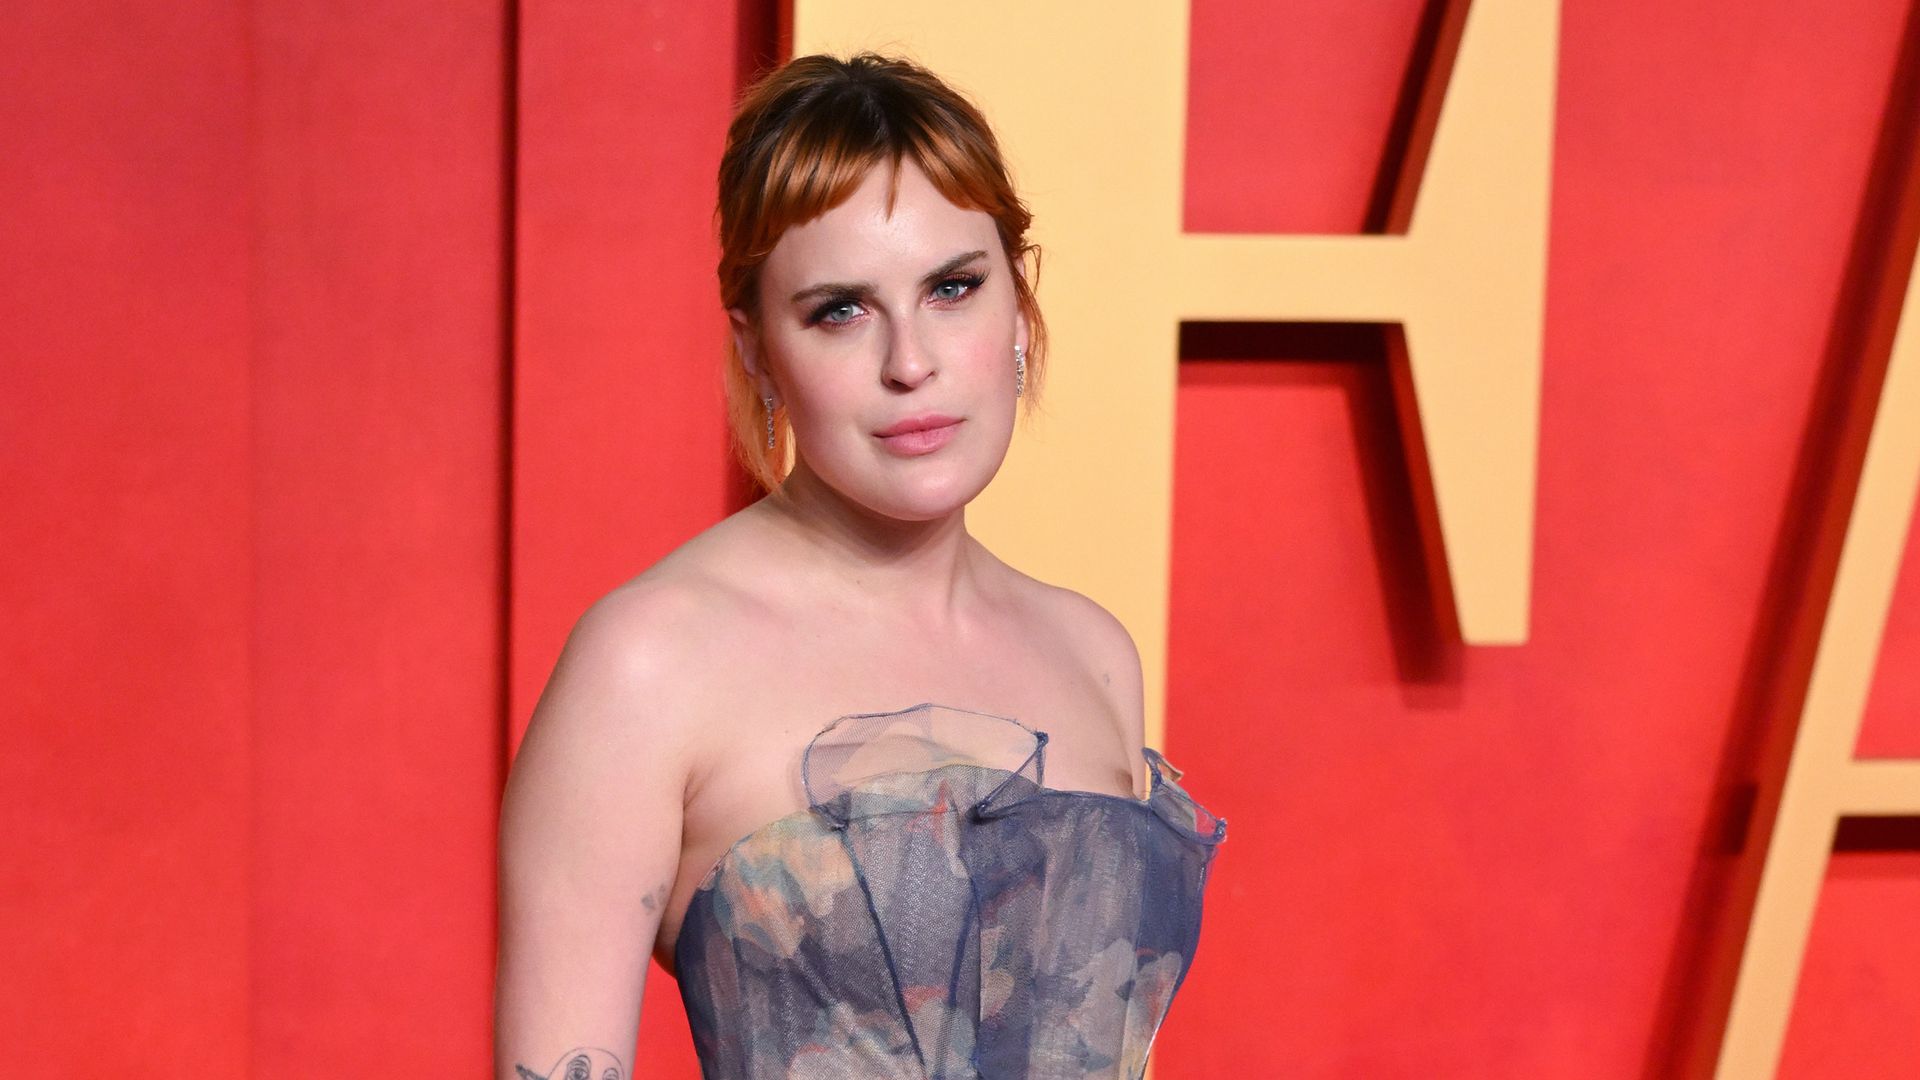 Tallulah Willis reveals 'real' appearance after having fillers dissolved in glowing selfie